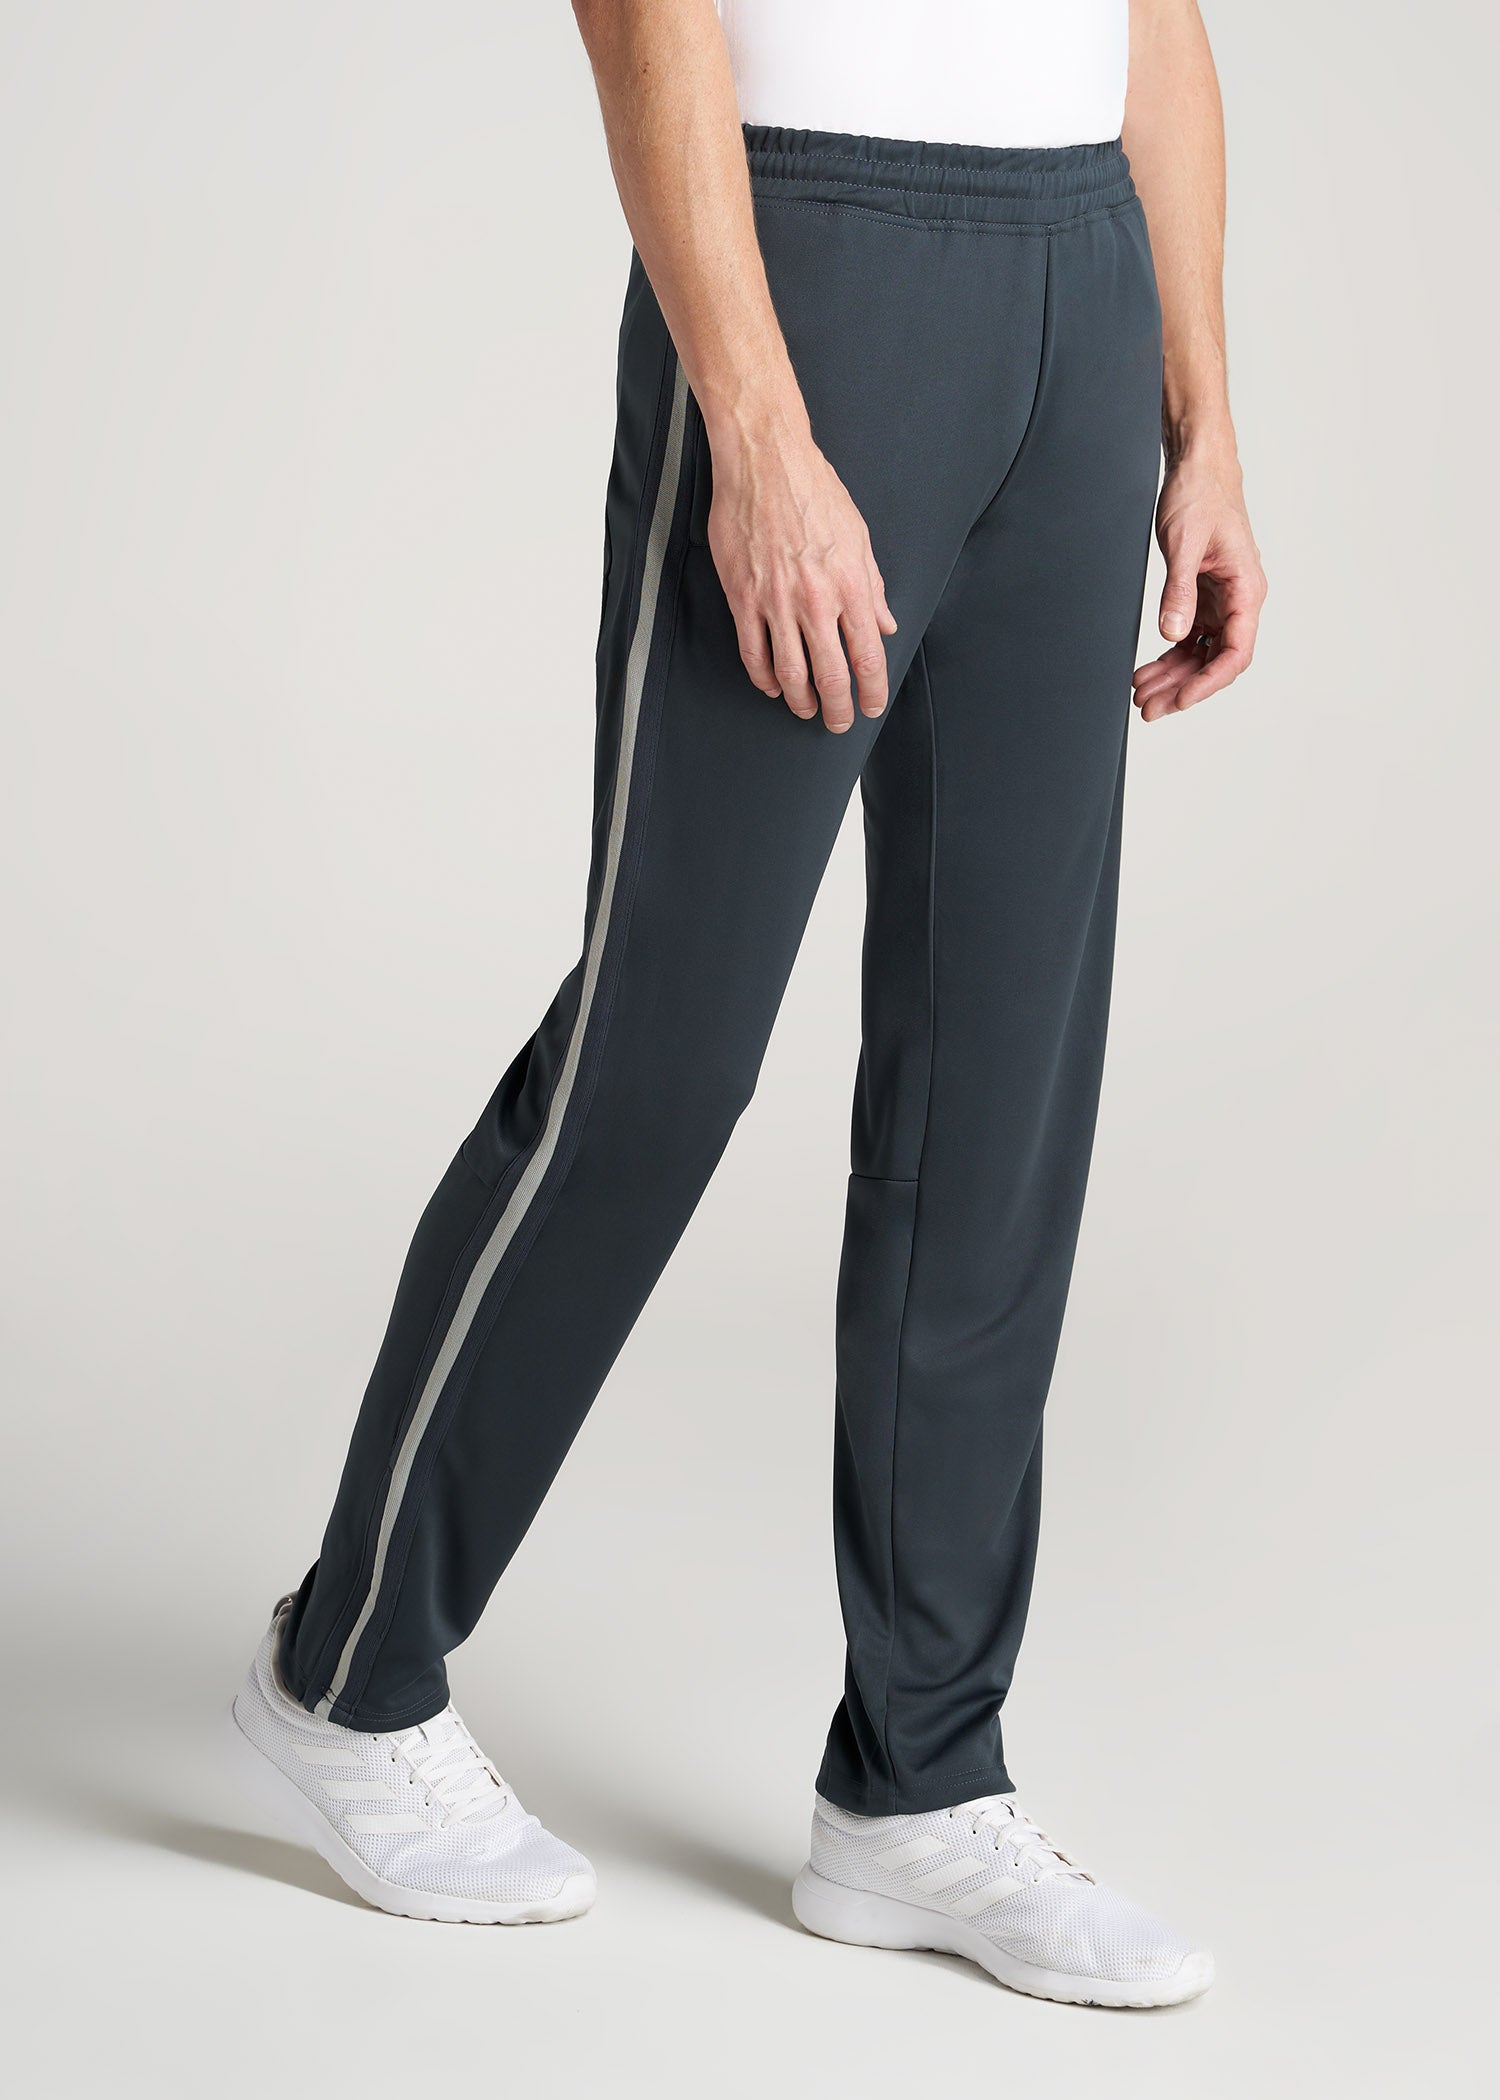 Athletic Stripe Pants for Tall Men in Storm Grey Stripe